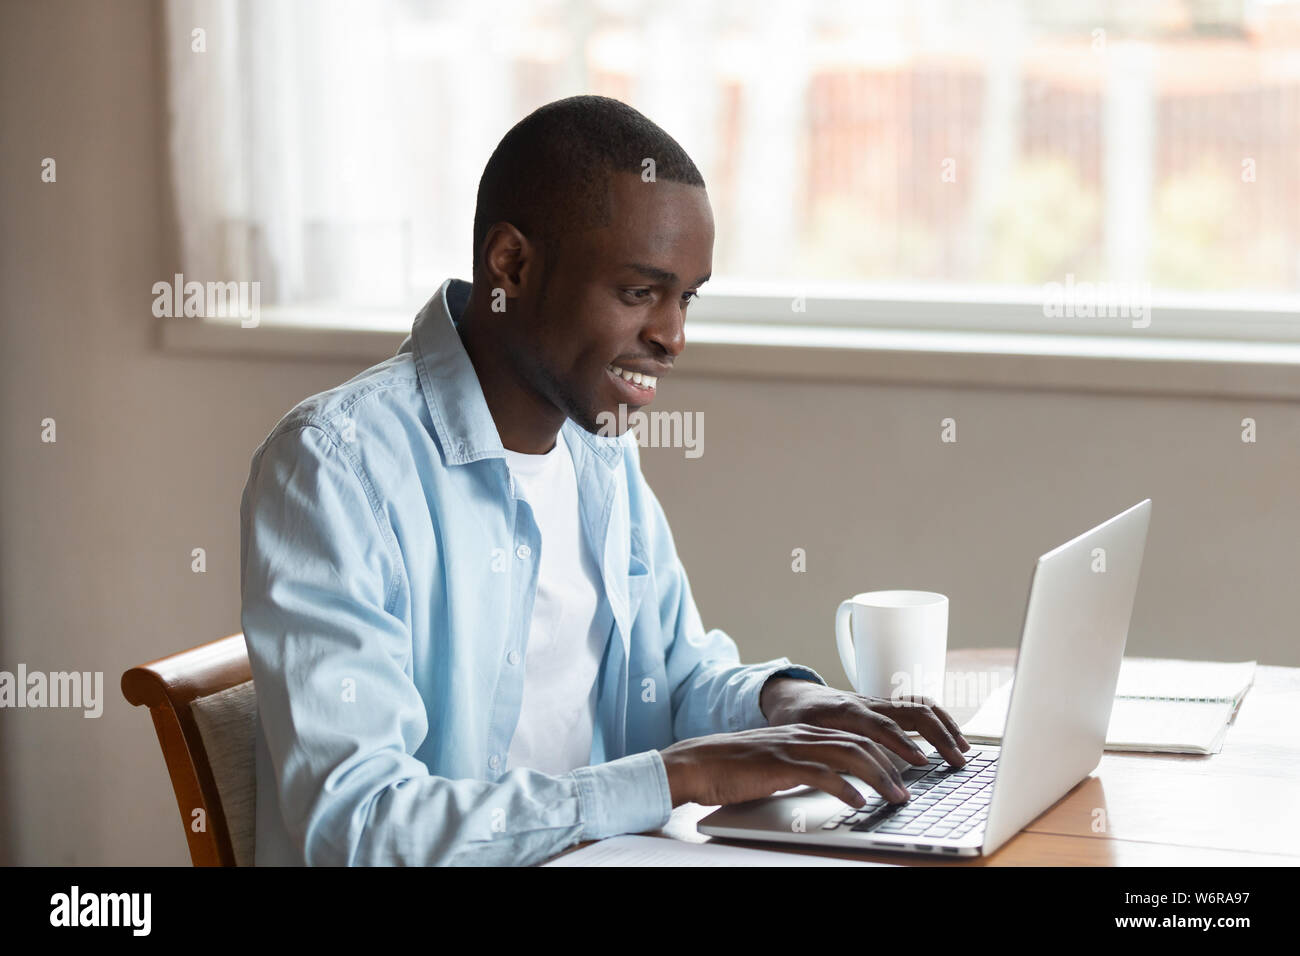 African millennial guy sitting at table typing on laptop Stock Photo